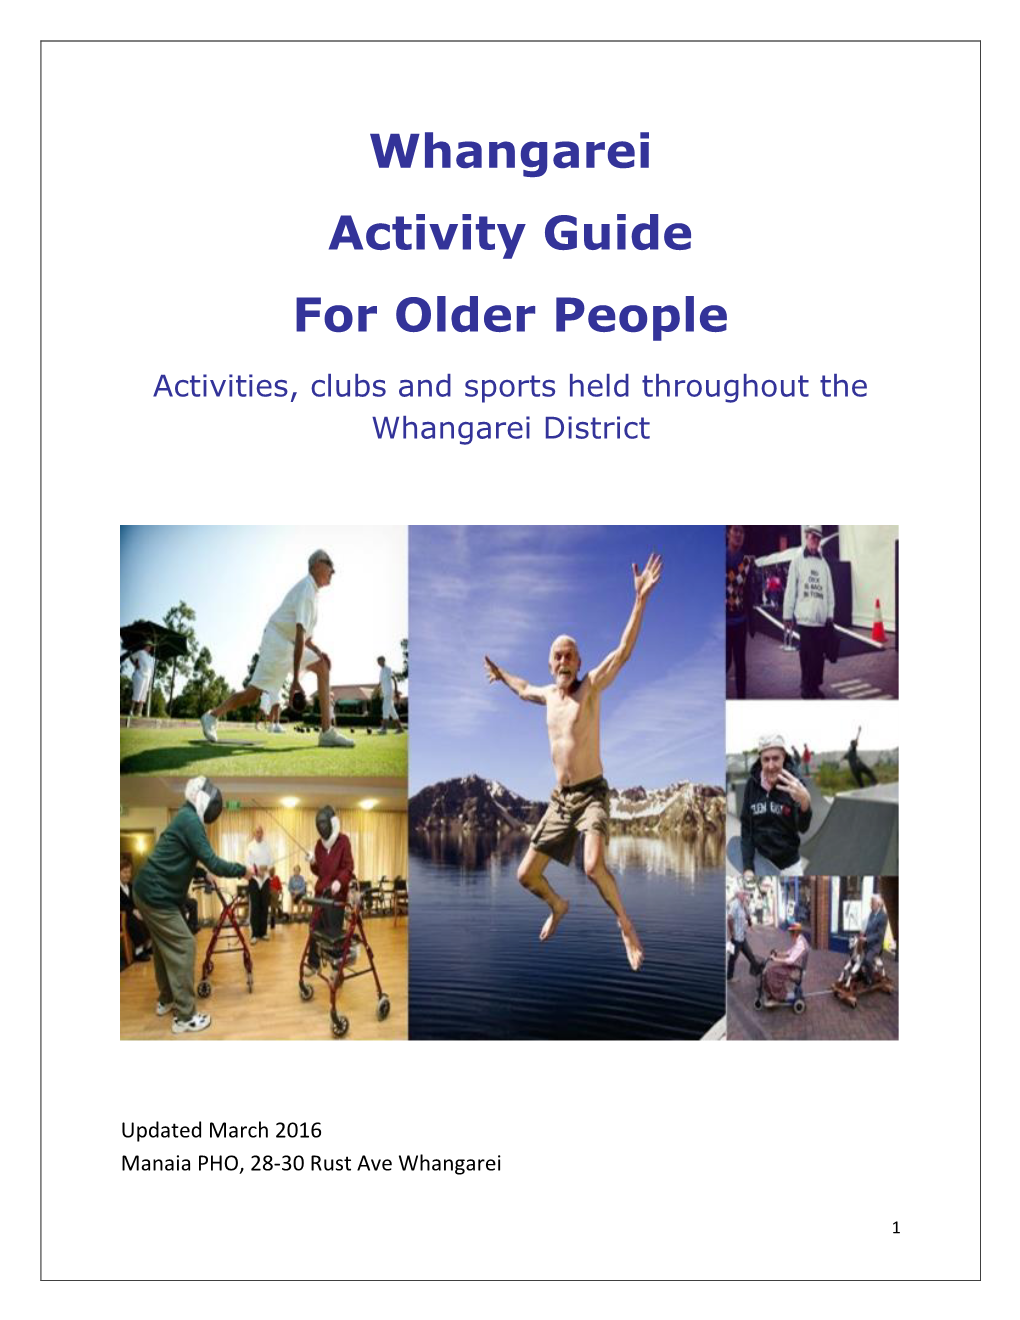 Whangarei Activity Guide for Older People